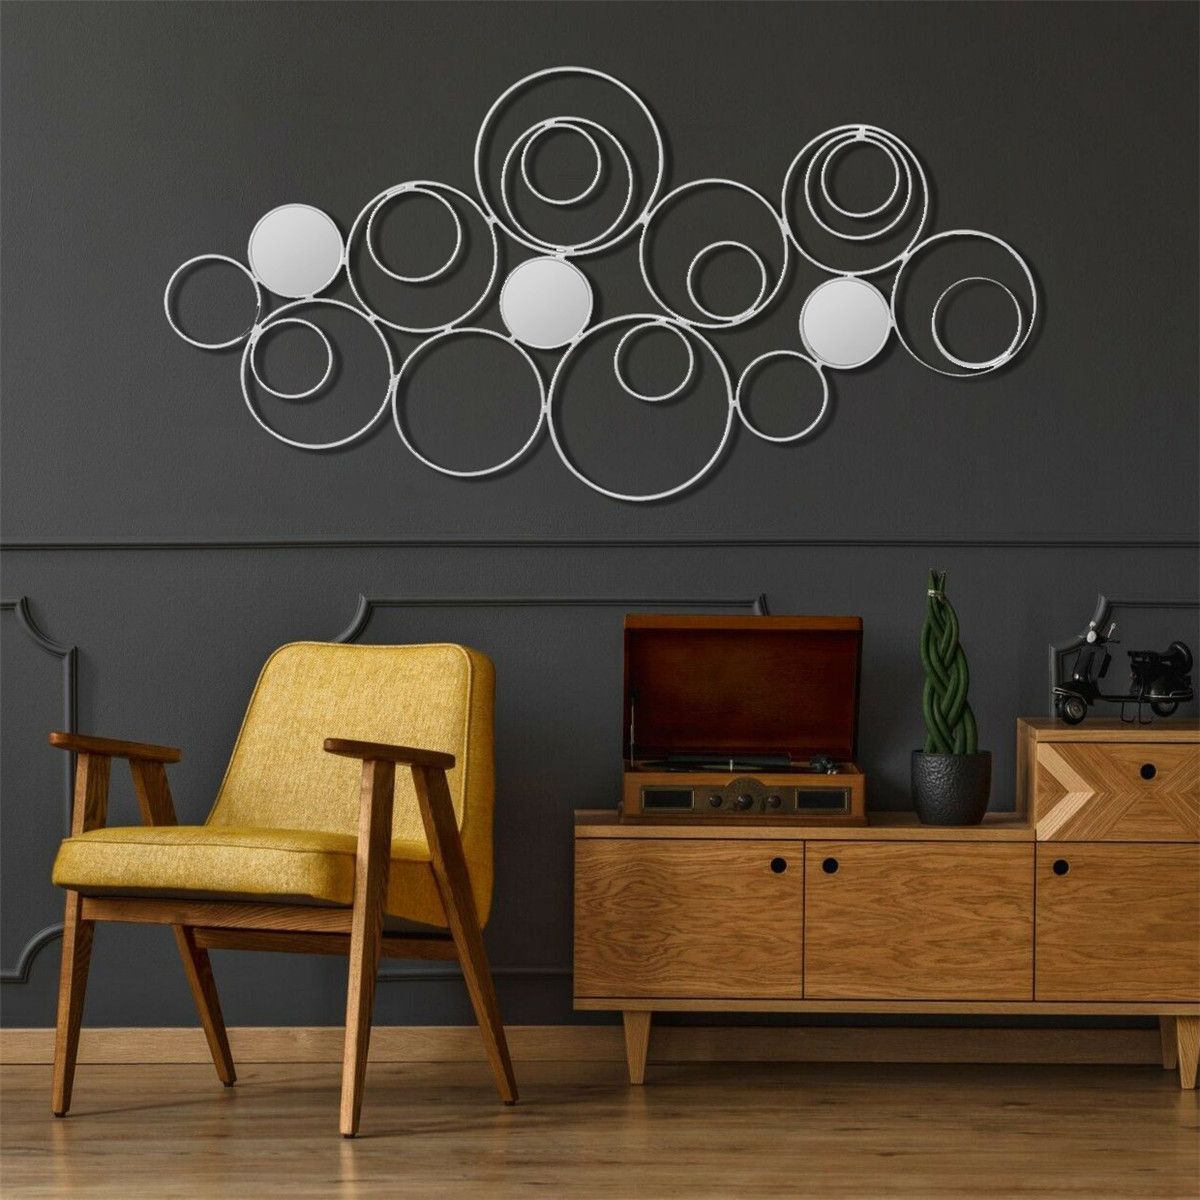 Wall-Mirror-Abstract-Metal-Hanging-Ring-Round-Sculpture-Home-Art-Decoration-1762500